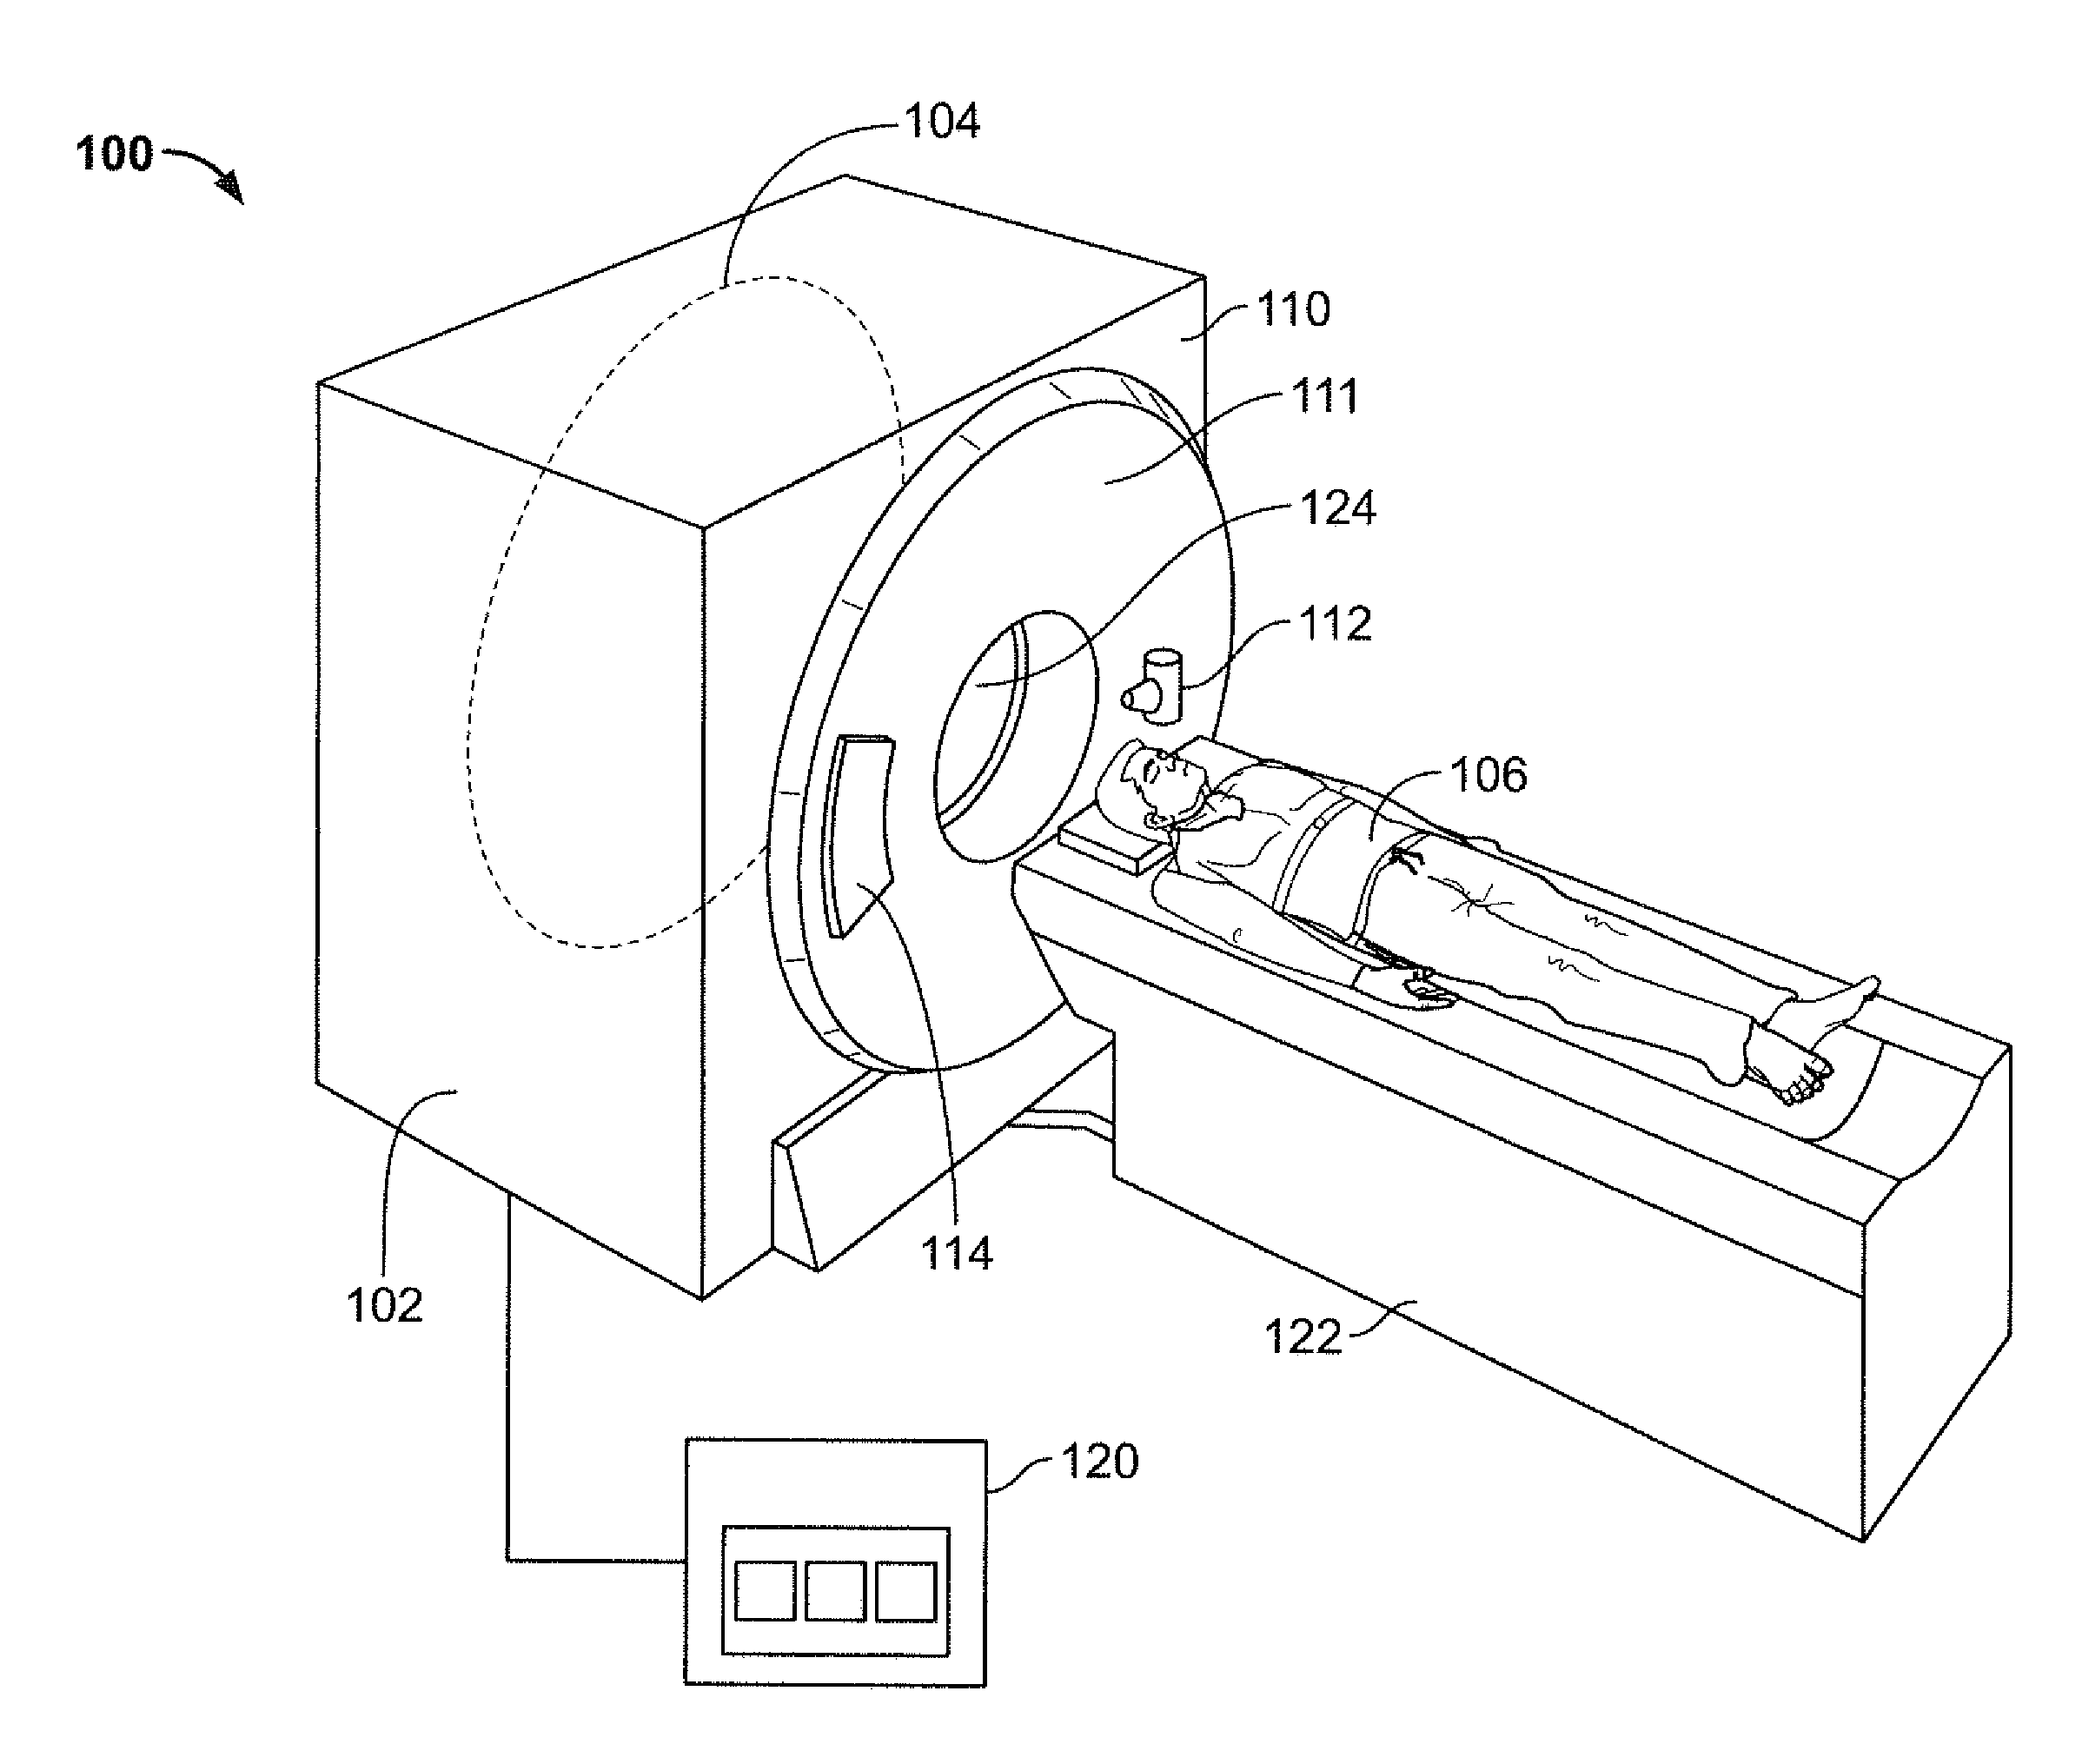 Systems and methods for integration of a positron emission tomography (PET) detector with a computed-tomography (CT) gantry